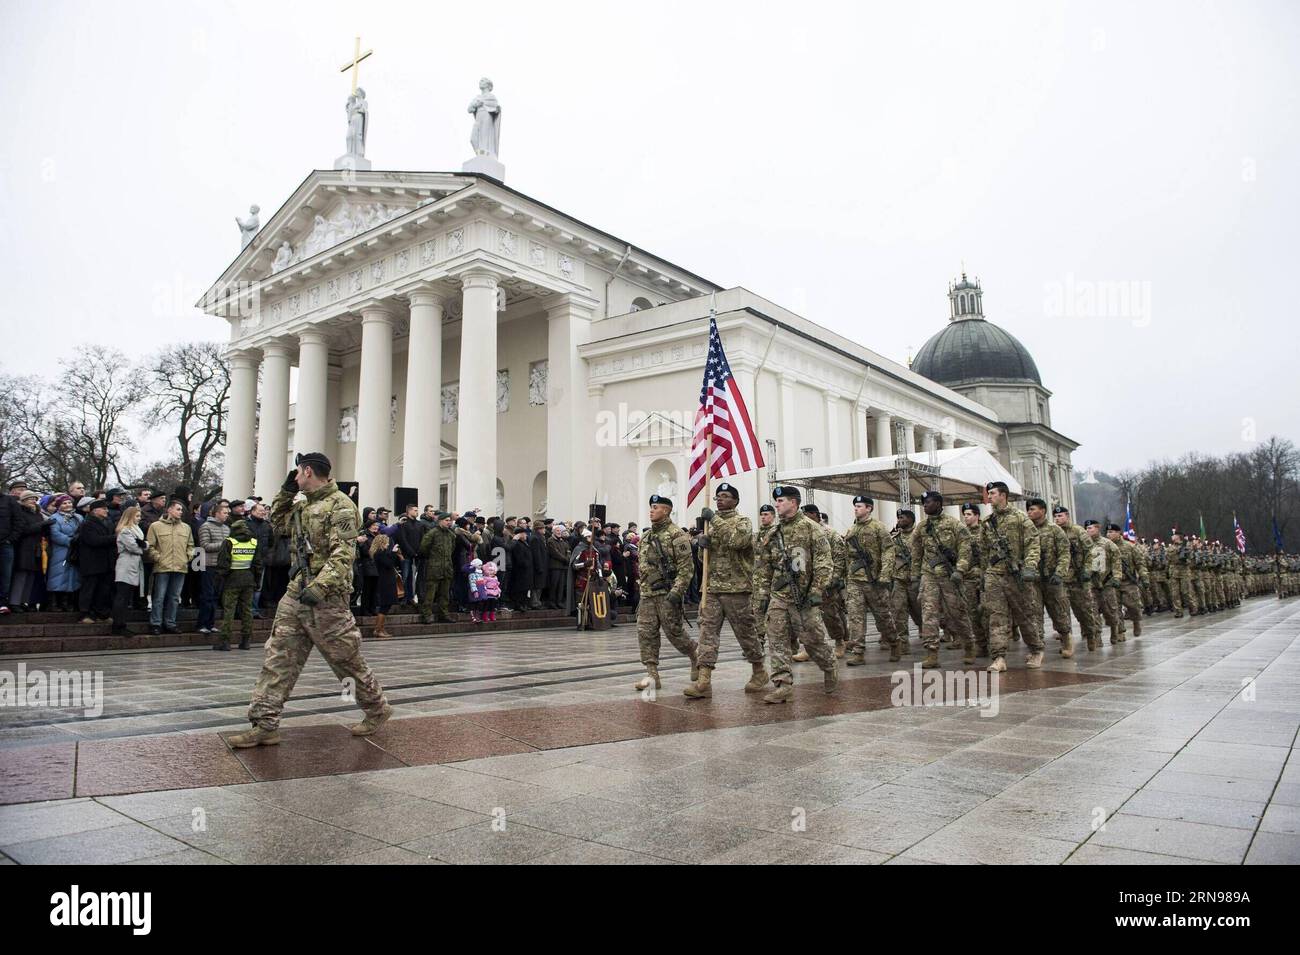 Litauen: Militärparade in Vilnius (151123) -- VILNIUS, Nov. 23, 2015 -- U.S. armed forces attend a celebration ceremony for Lithuanian Armed Forces Day in Vilnius, Lithuania, on Nov. 23, 2015. Lithuanian armed forces, with troops of some NATO member countries, held a gala with formation on Sunday to celebrate the Armed Forces Day of Lithuania. The first decree on establishing armed forces was appoved on Nov. 23, 1918, which became the Armed Forces Day of the Baltic country. ) LITHUANIA-VILNIUS-ARMED FORCES DAY AlfredasxPliadis PUBLICATIONxNOTxINxCHN   Lithuania Military Parade in Vilnius 15112 Stock Photo